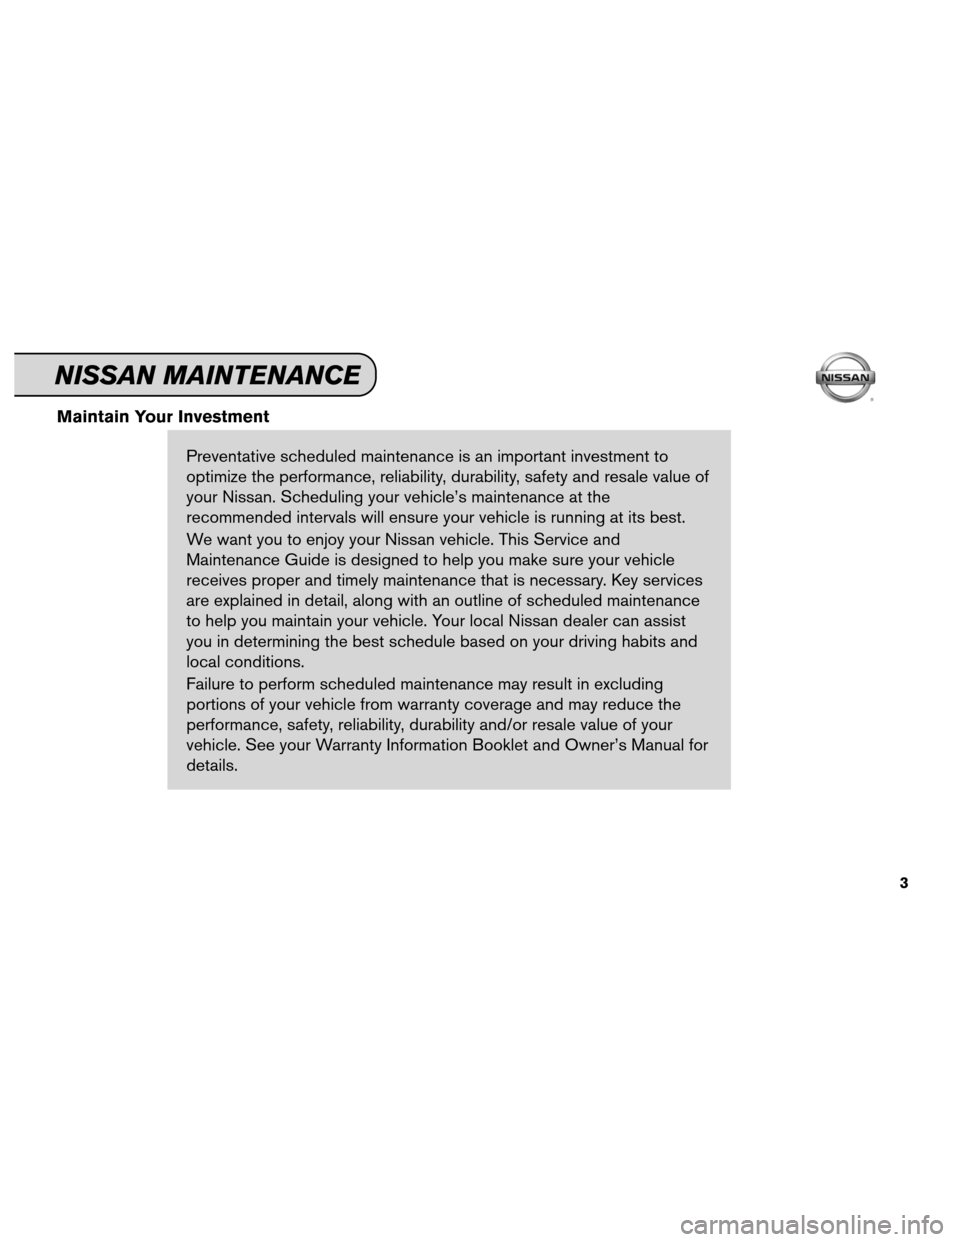 NISSAN 370Z ROADSTER 2012 Z34 Service And Maintenance Guide Maintain Your InvestmentPreventative scheduled maintenance is an important investment to
optimize the performance, reliability, durability, safety and resale value of
your Nissan. Scheduling your vehi